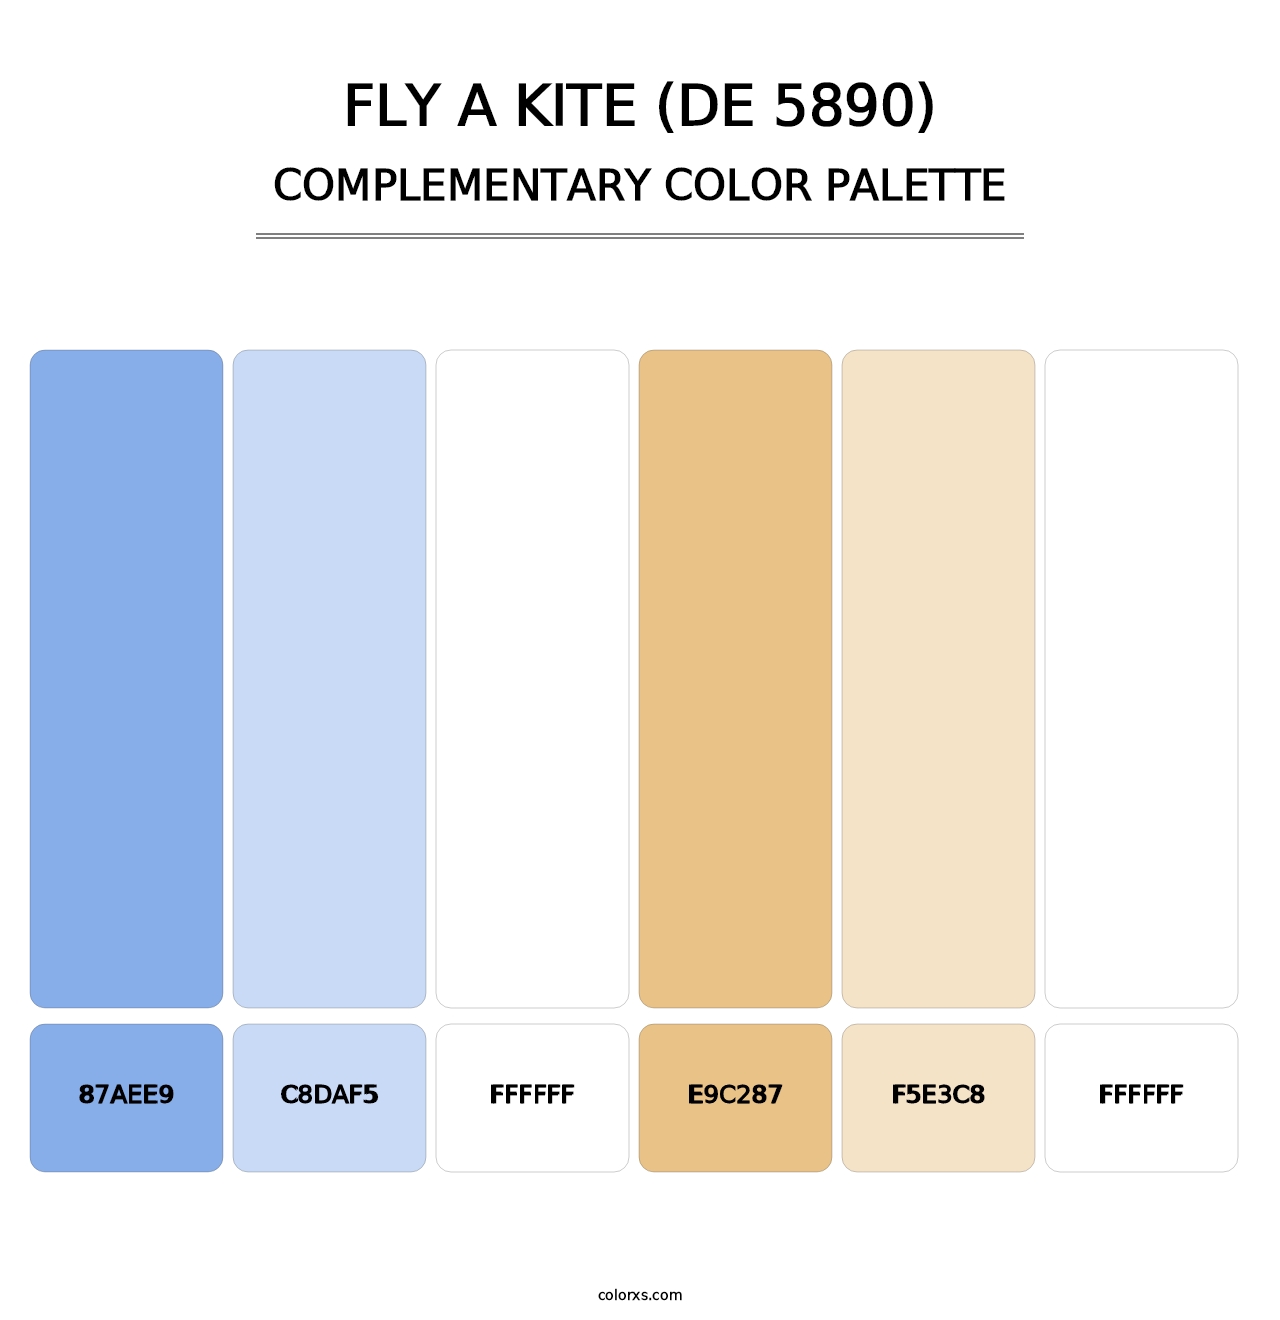 Fly a Kite (DE 5890) - Complementary Color Palette